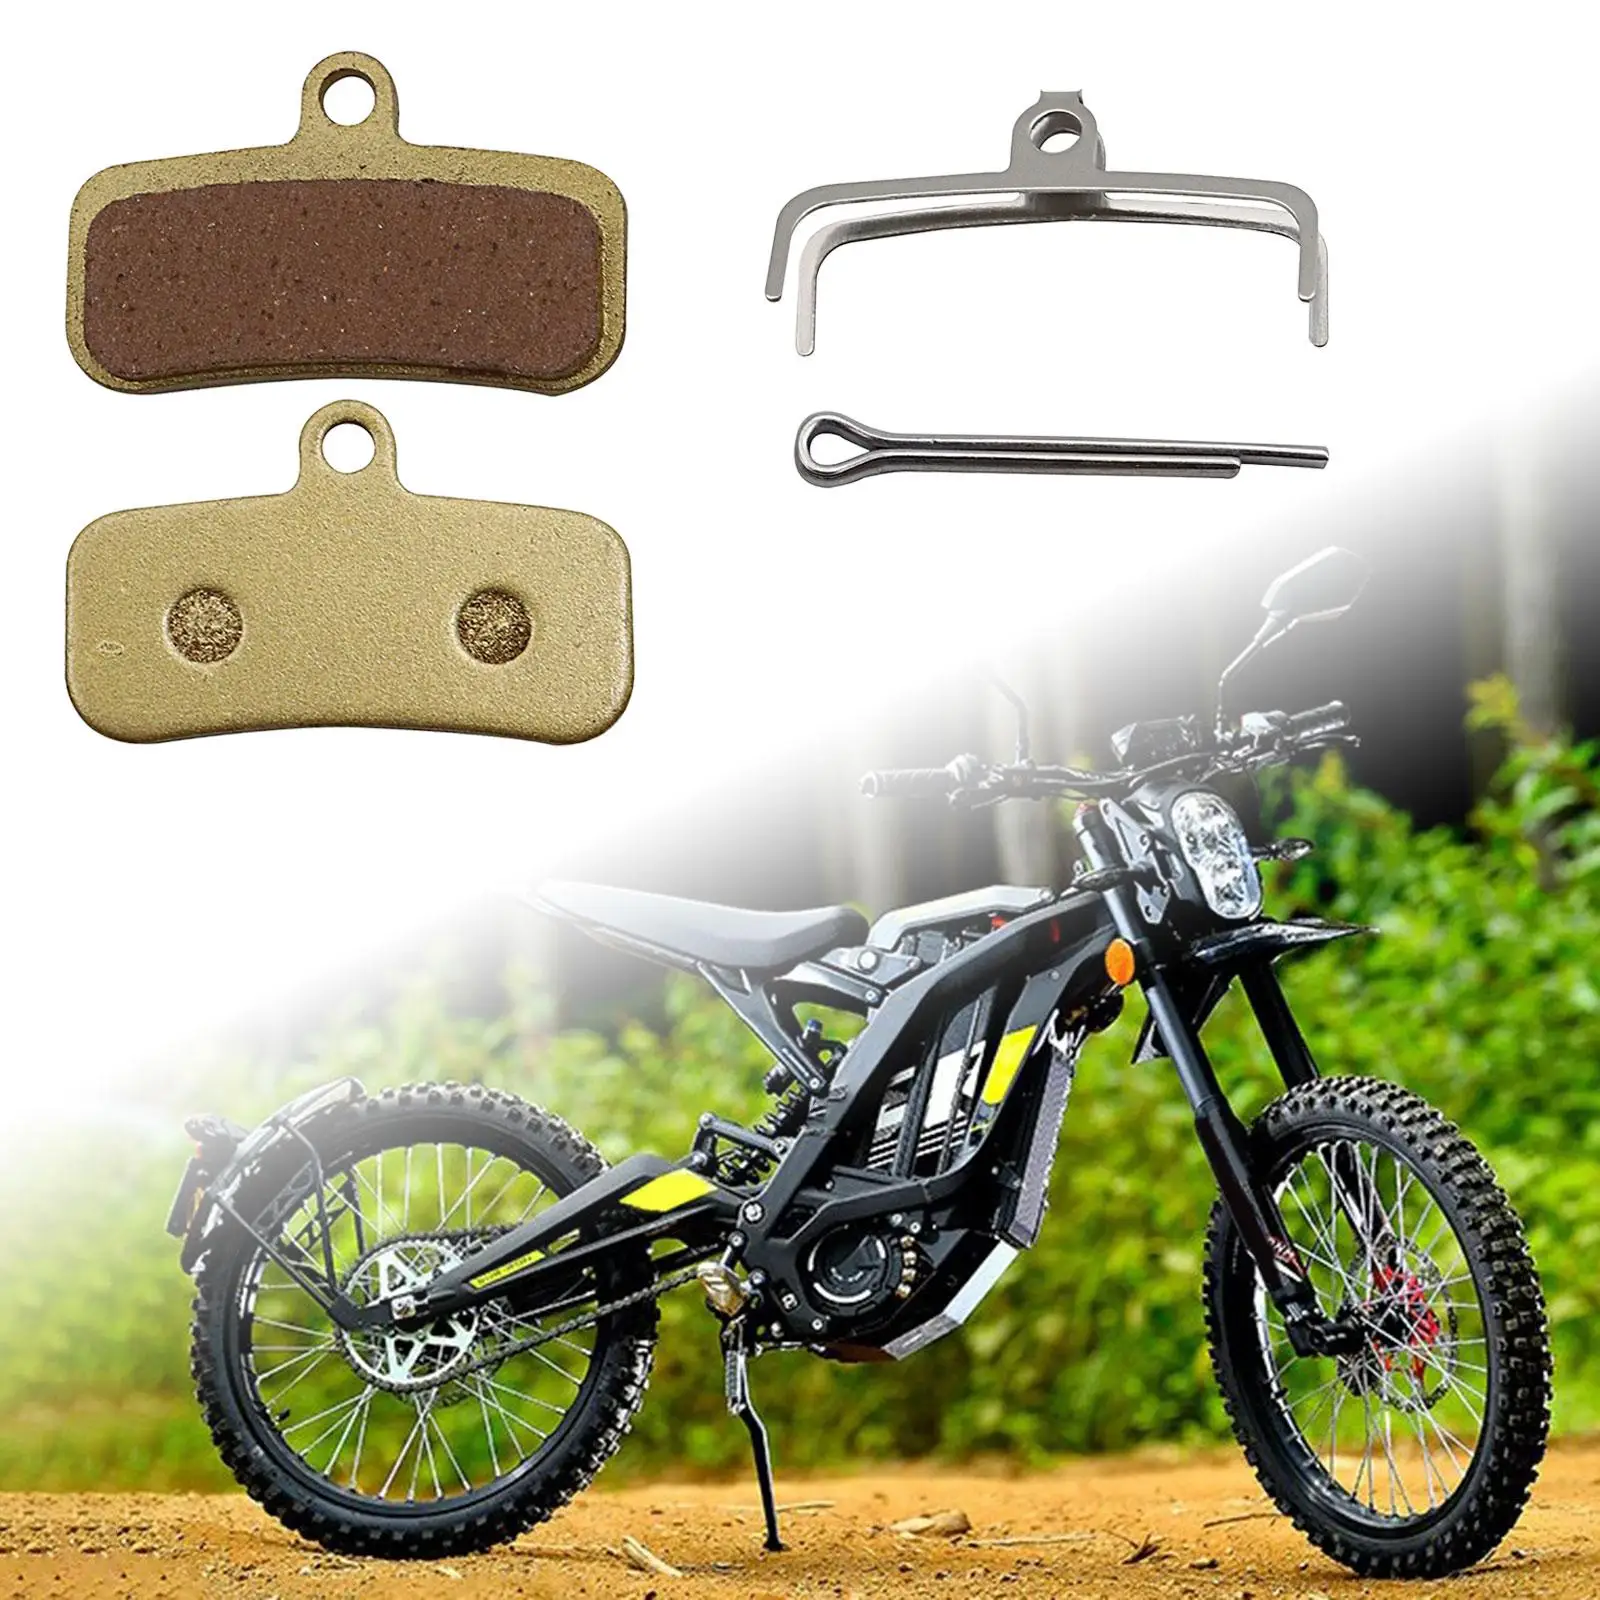 2 Pieces Motorcycle Front and Rear Brake Pads Motocross Modification Accessories for Surron Light Bee Replaces Professional